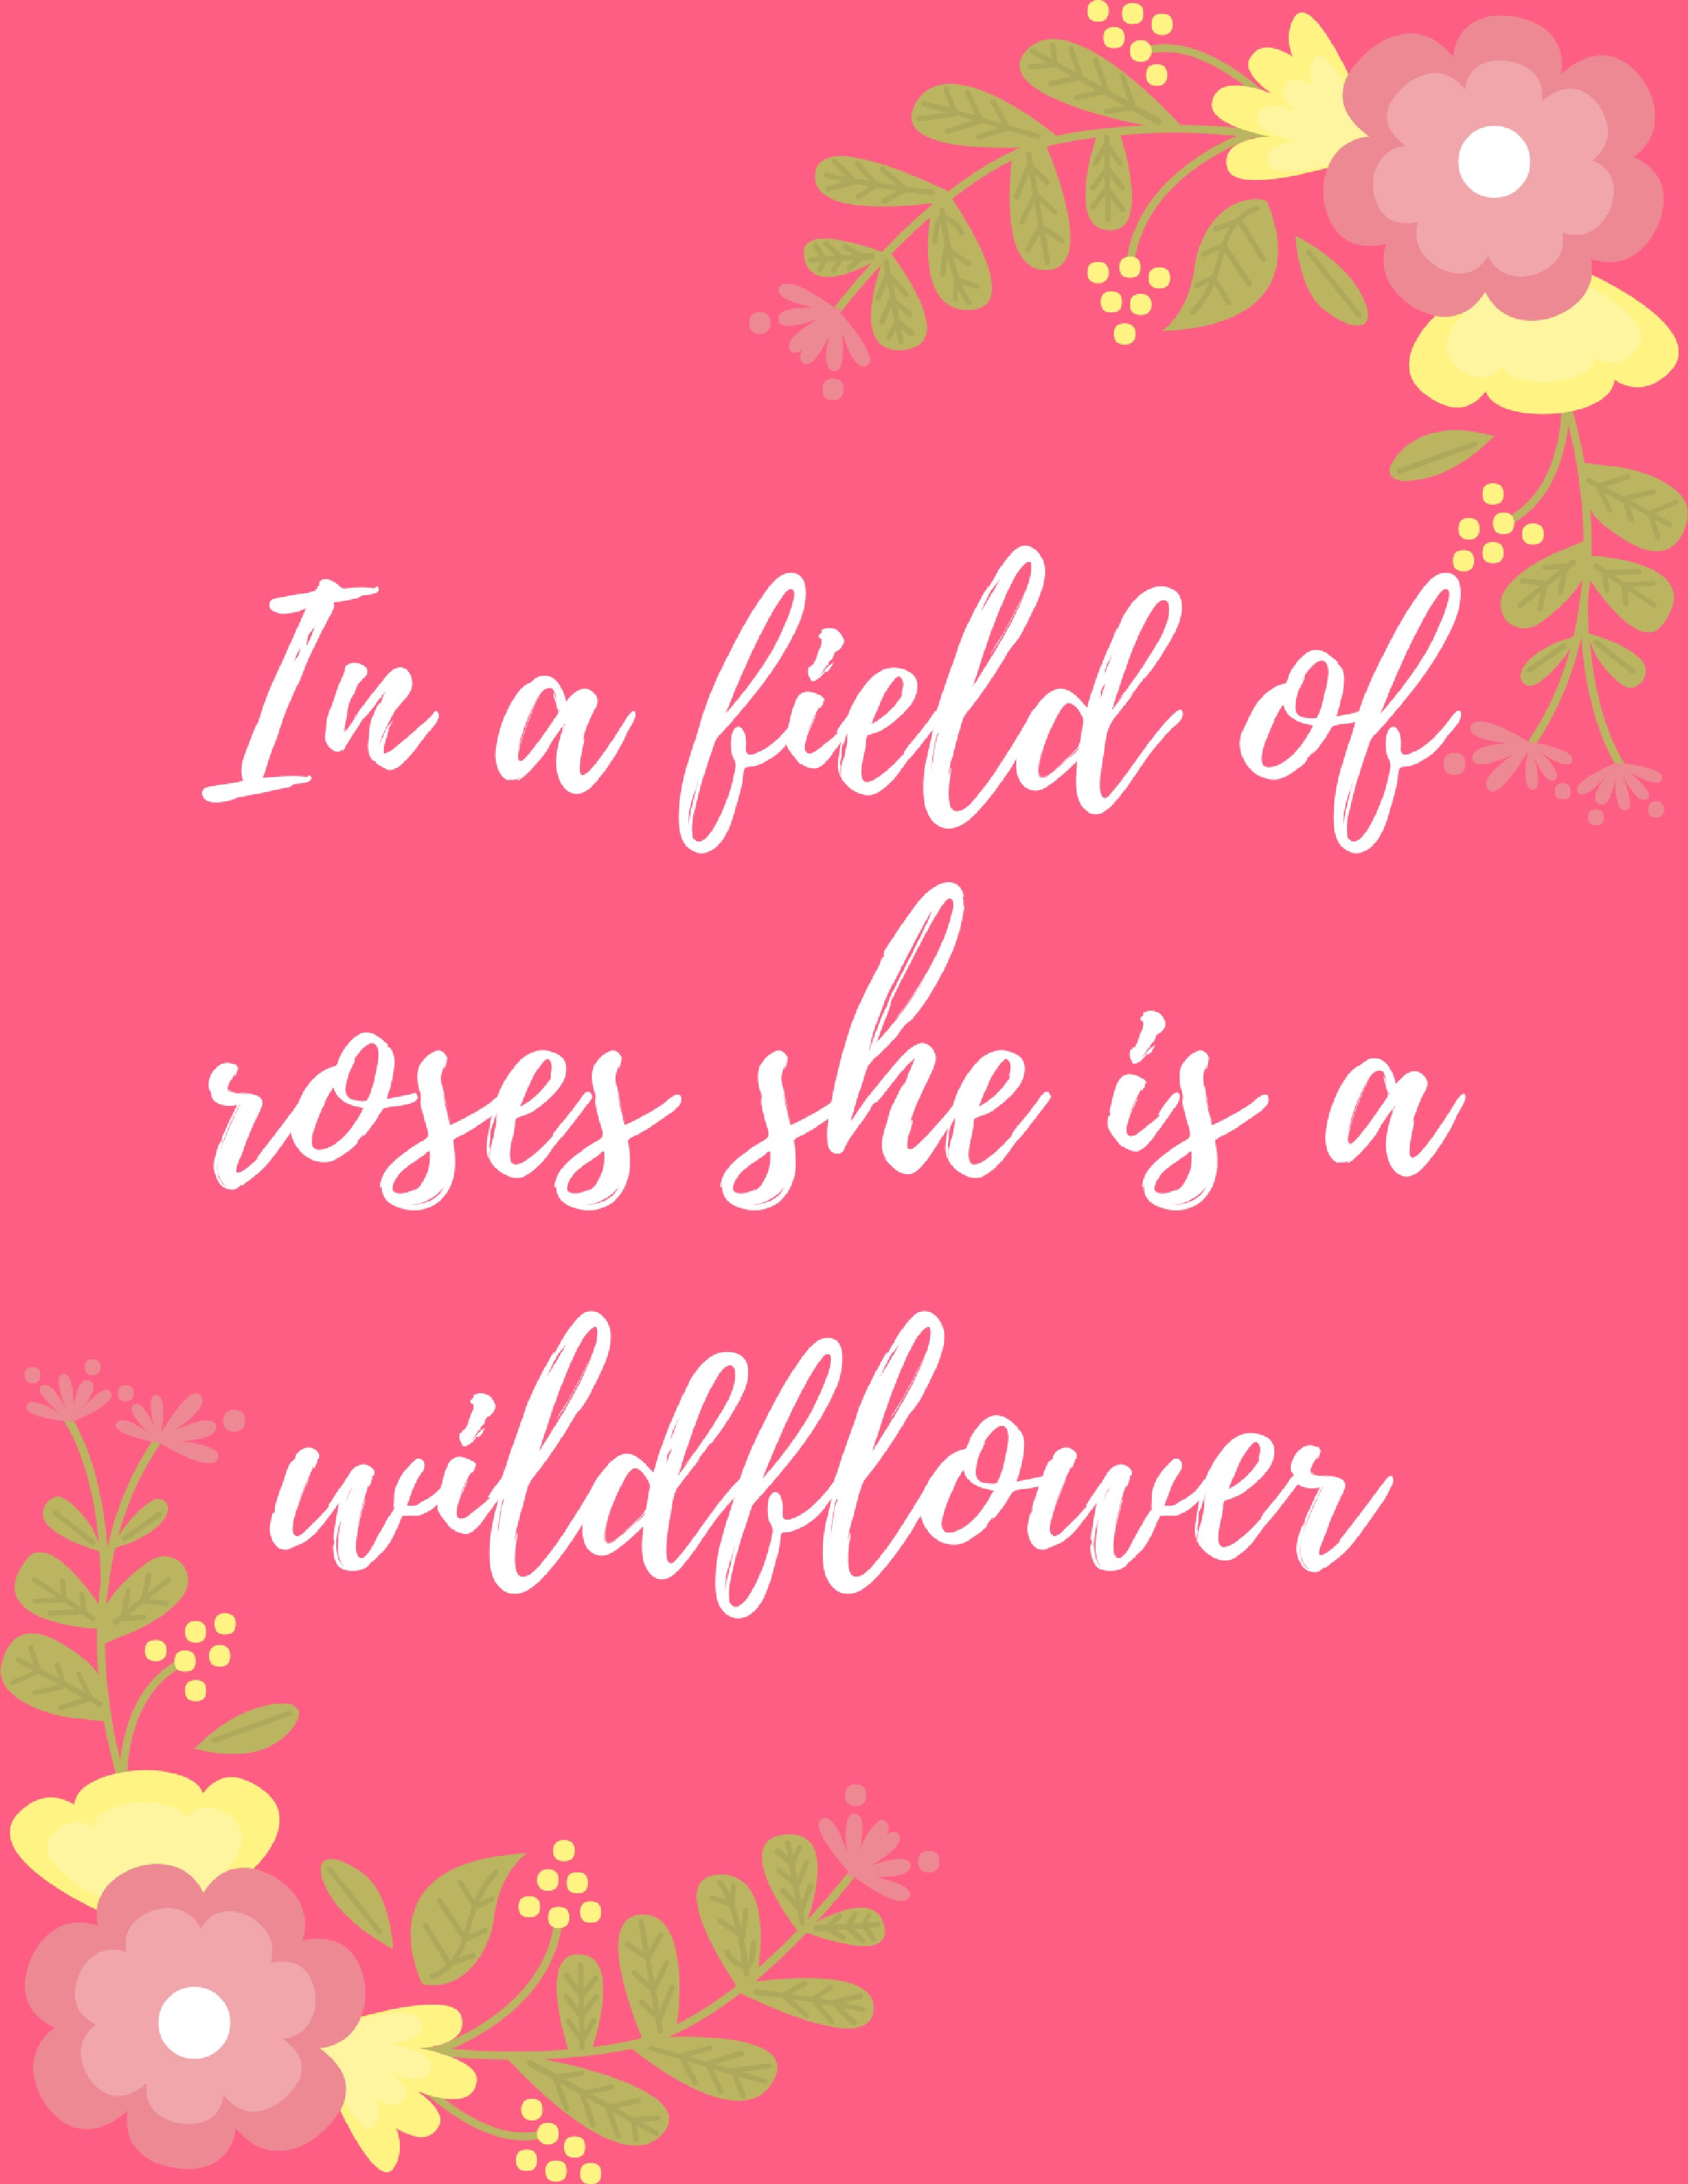 She's a wildflower